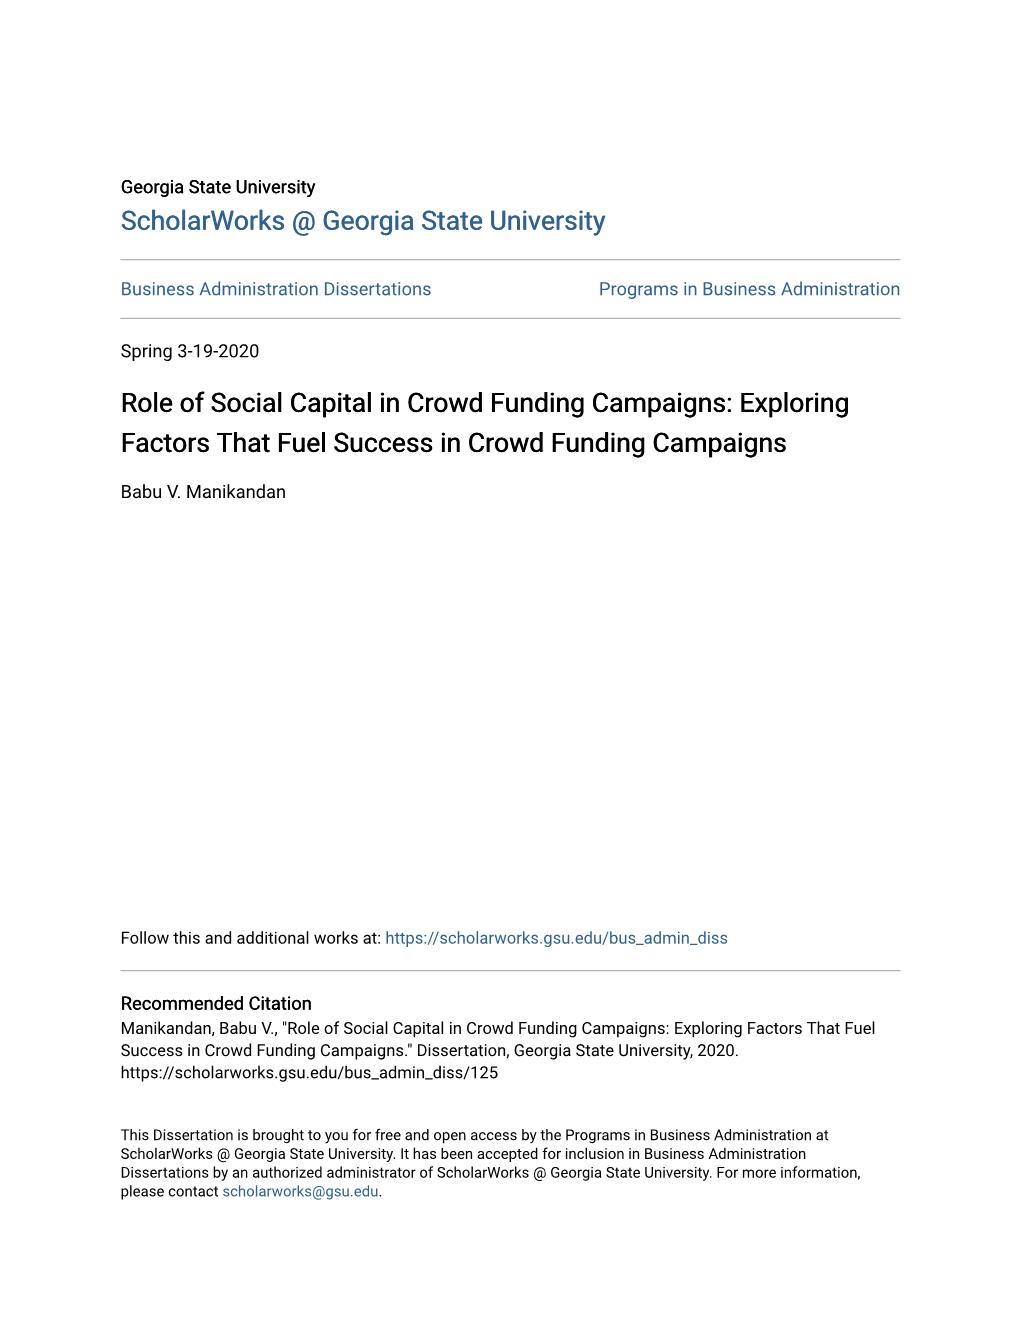 Role of Social Capital in Crowd Funding Campaigns: Exploring Factors That Fuel Success in Crowd Funding Campaigns